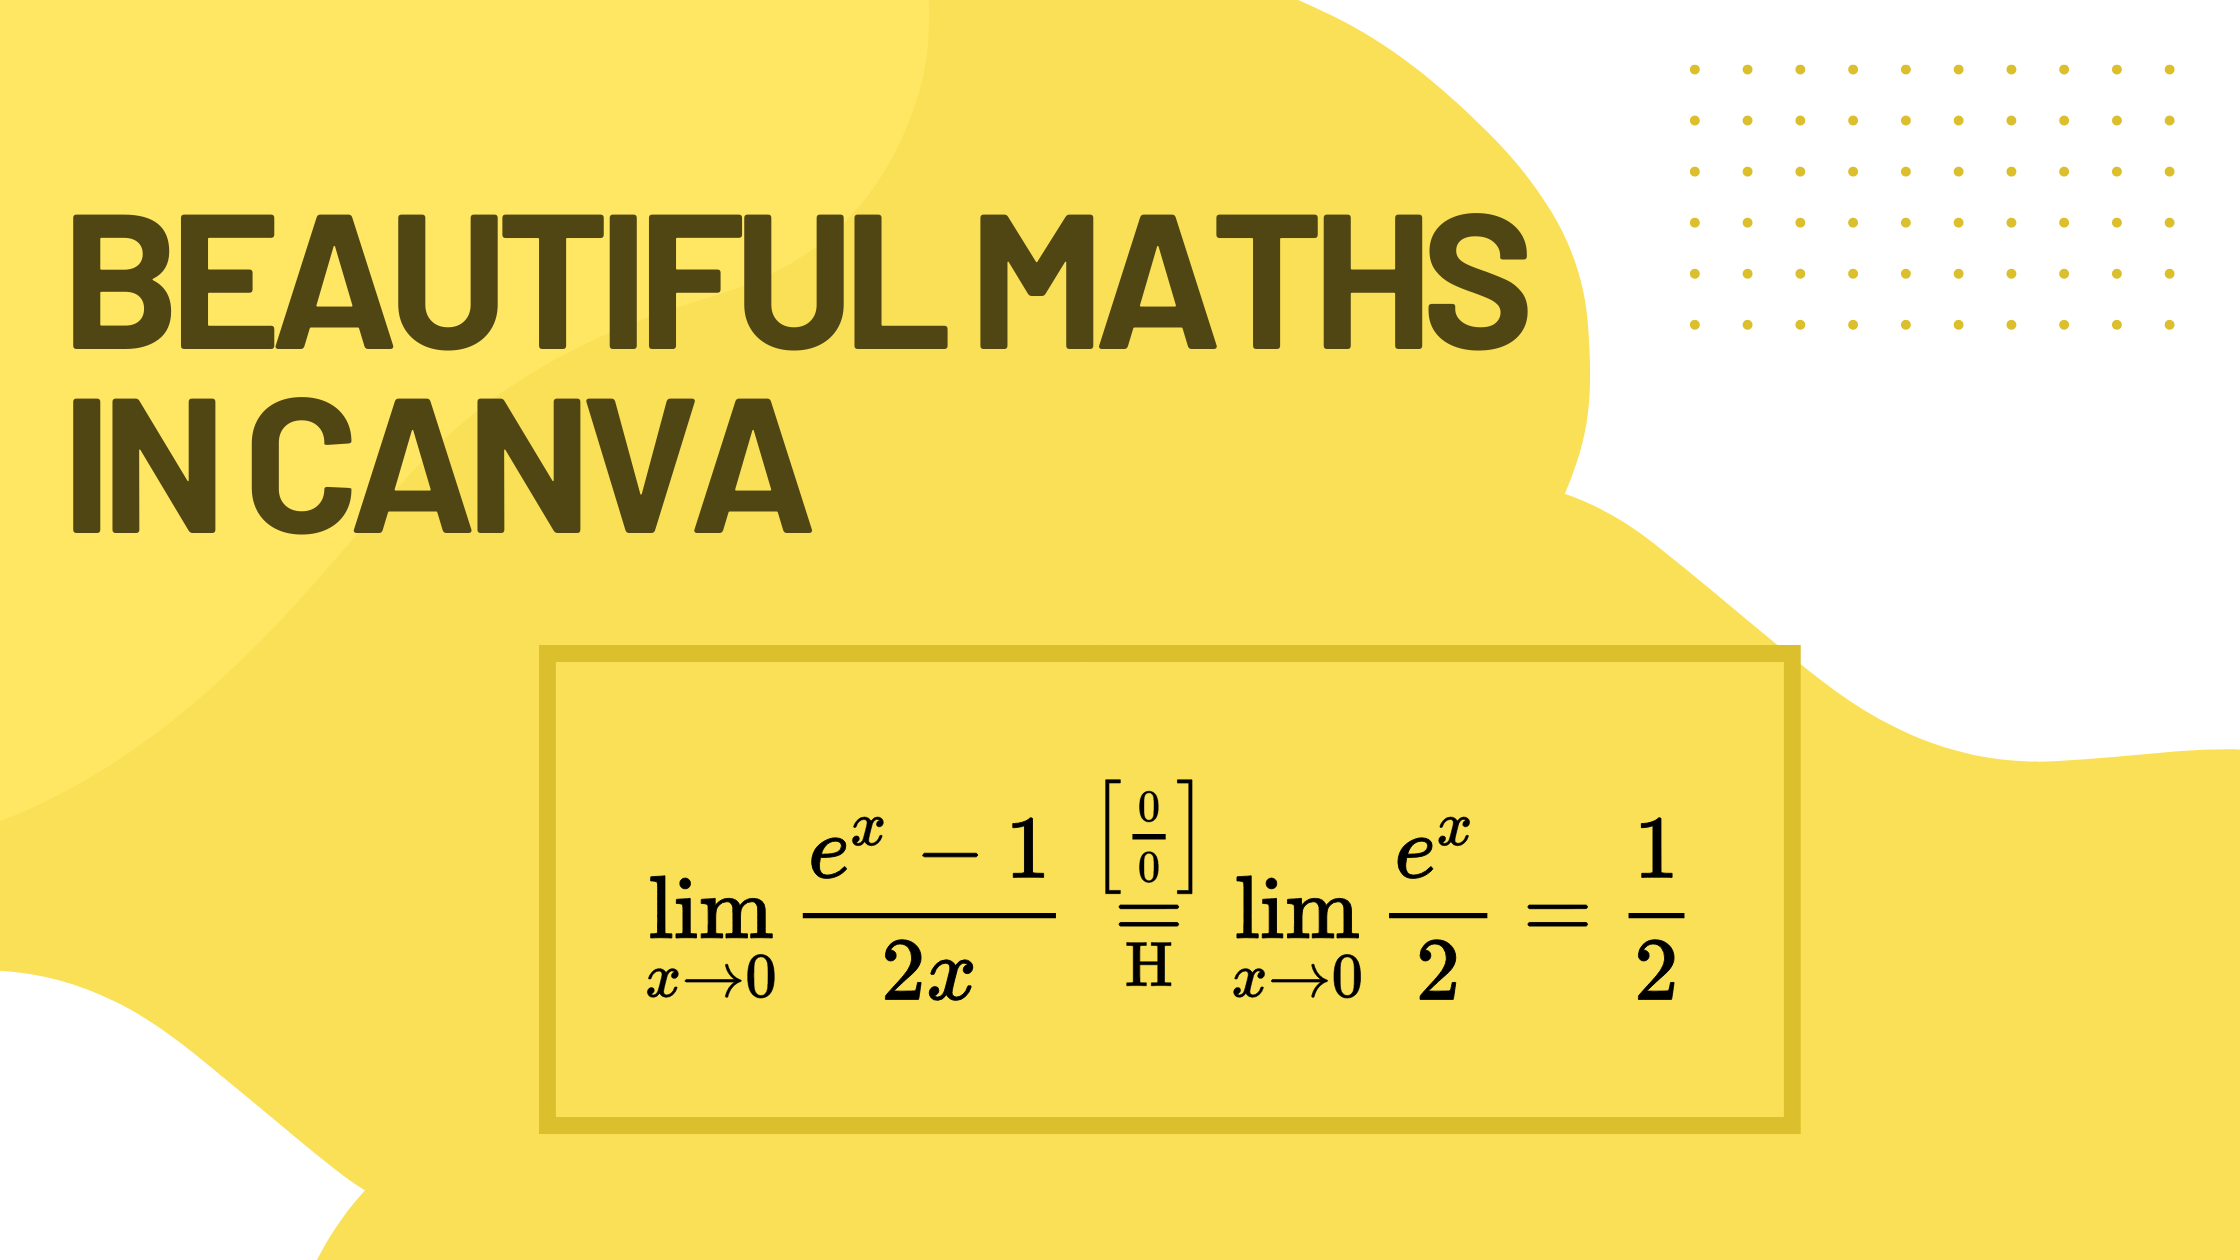 How to get beautiful mathematics in Canva